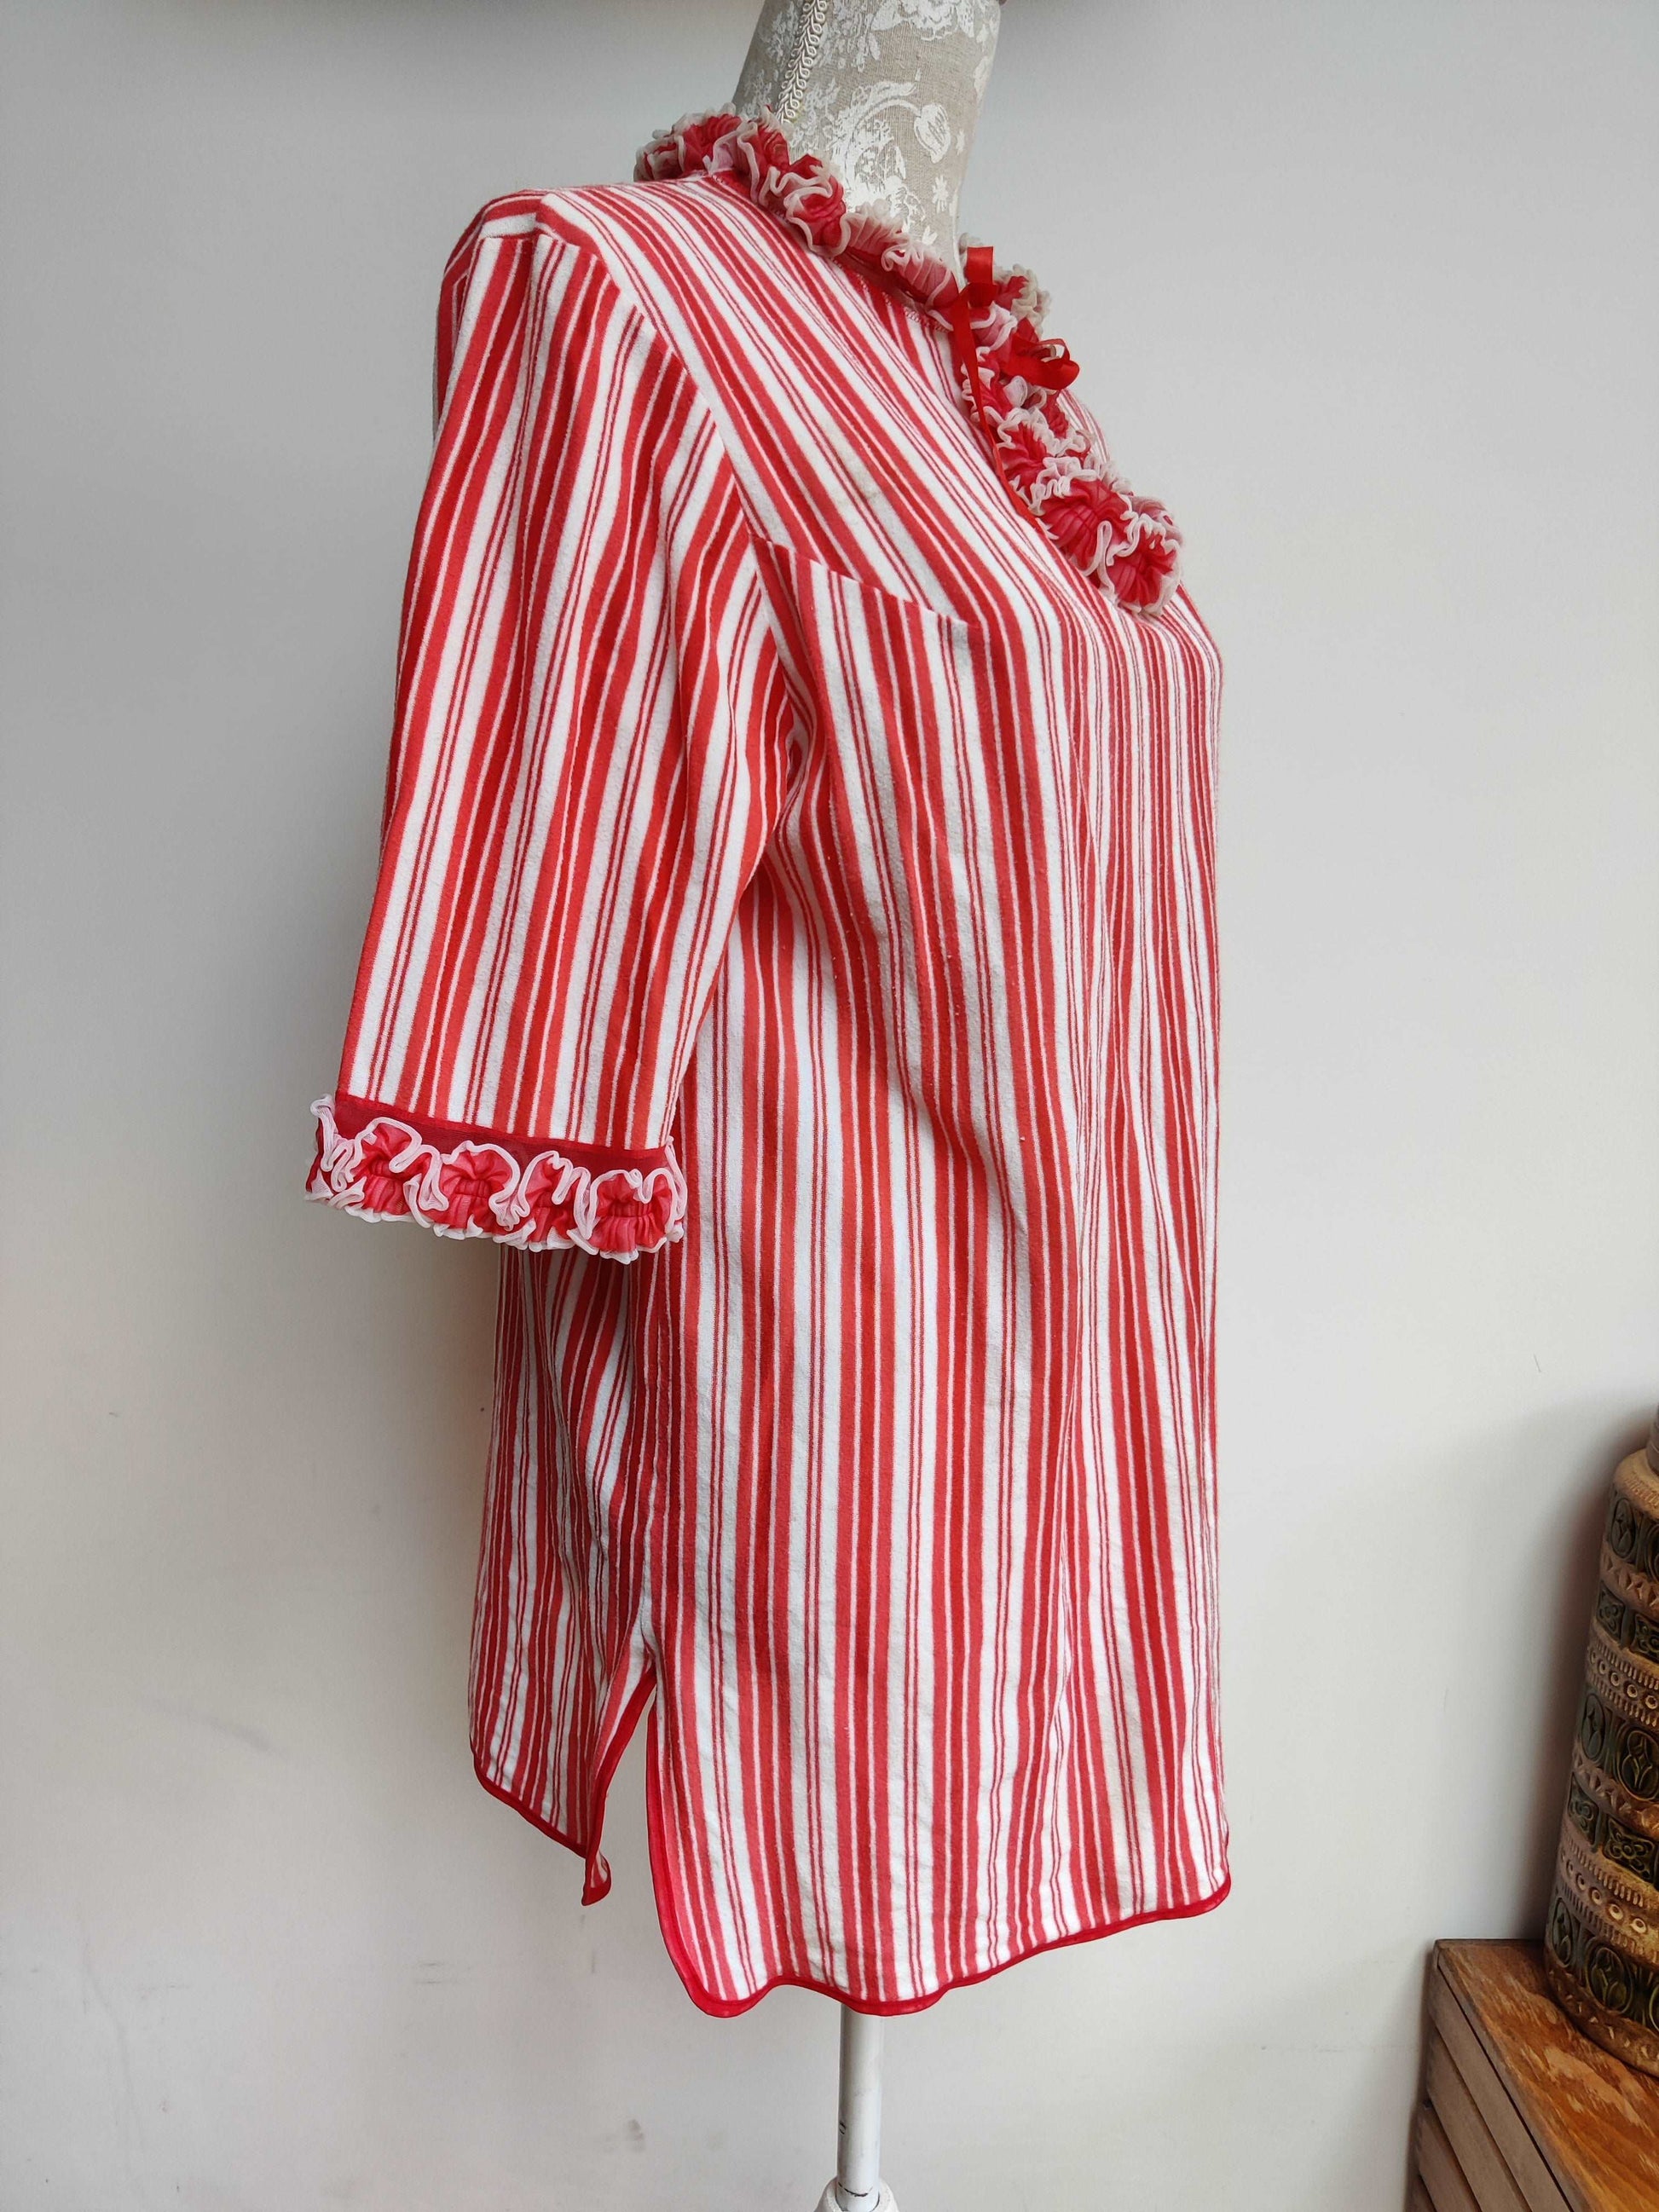 Fabulous coral stripe vintage frill smock top.